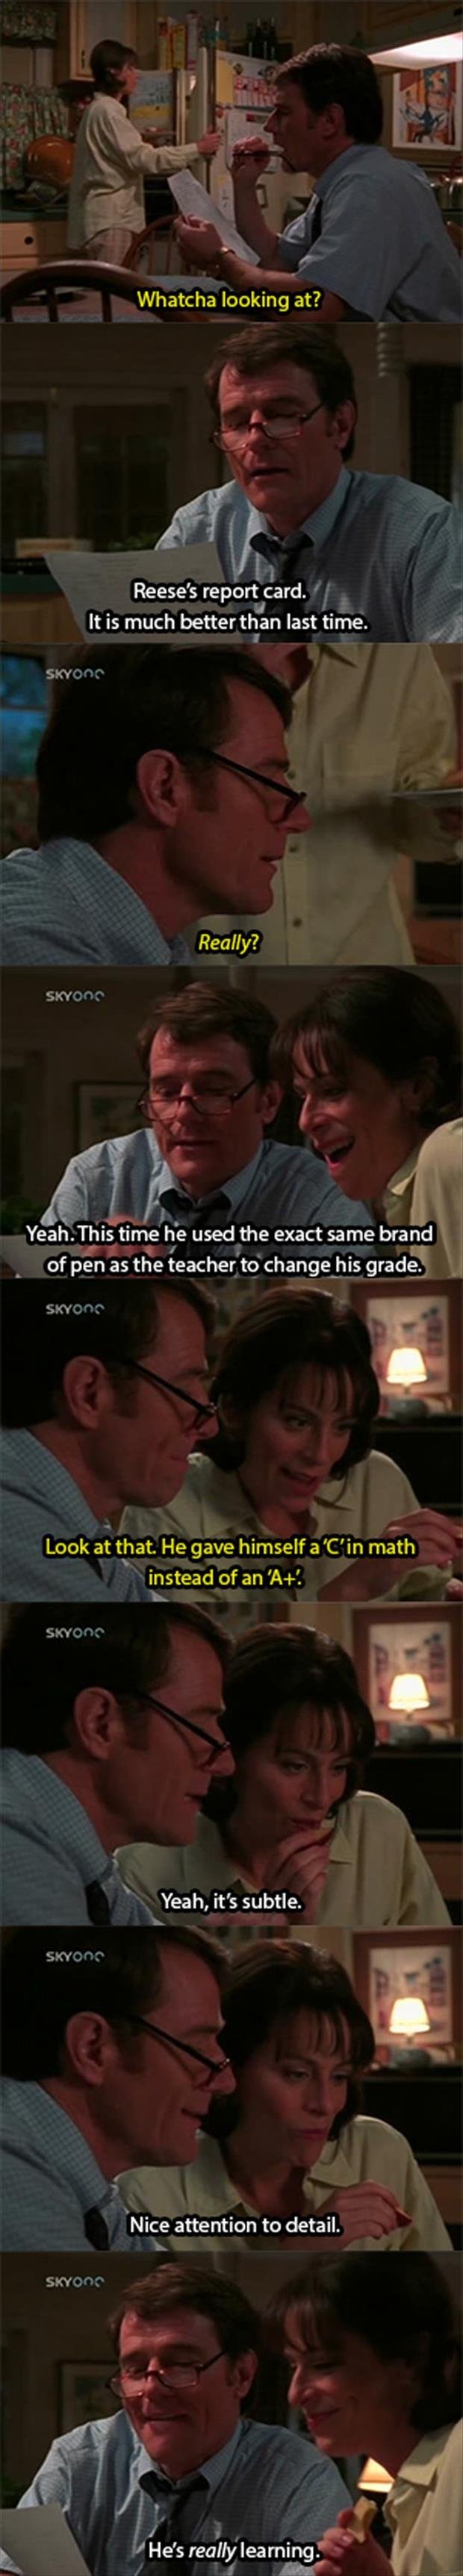 reese's report card in malcolm in the middle, subtle, lol, fail